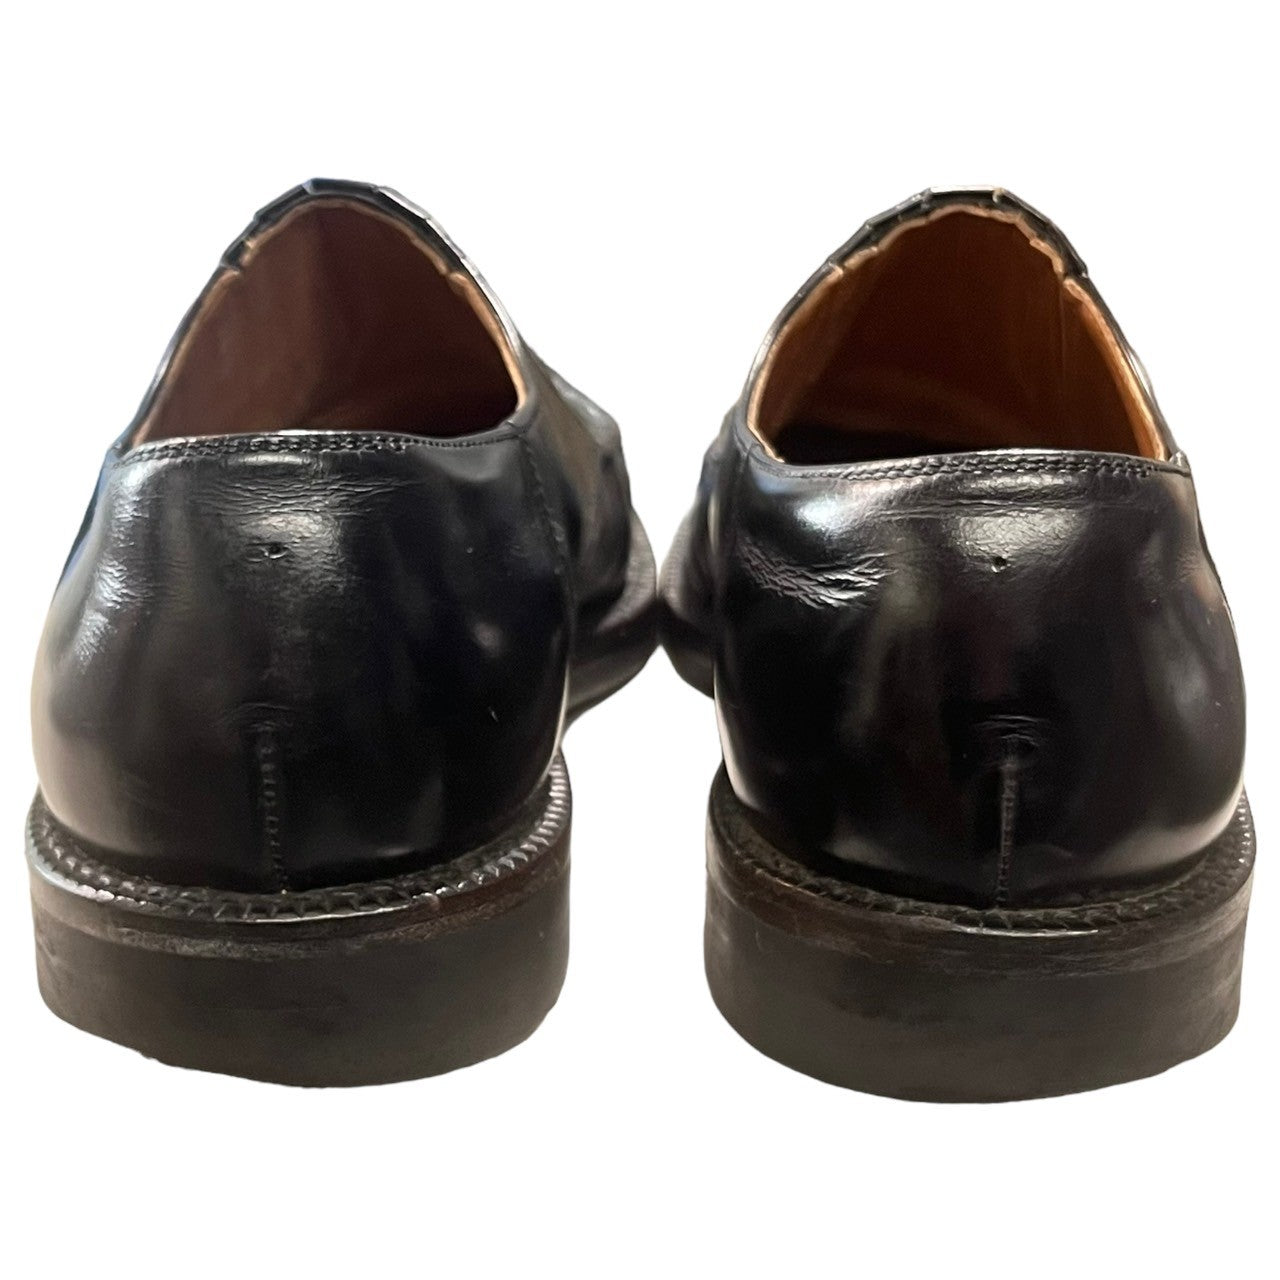 COMME des GARCONS HOMME(コムデギャルソンオム) 00s front gore leather shoes/フロントゴアレザーシューズ/革靴 SIZE 24 1/2 ブラック 日本製